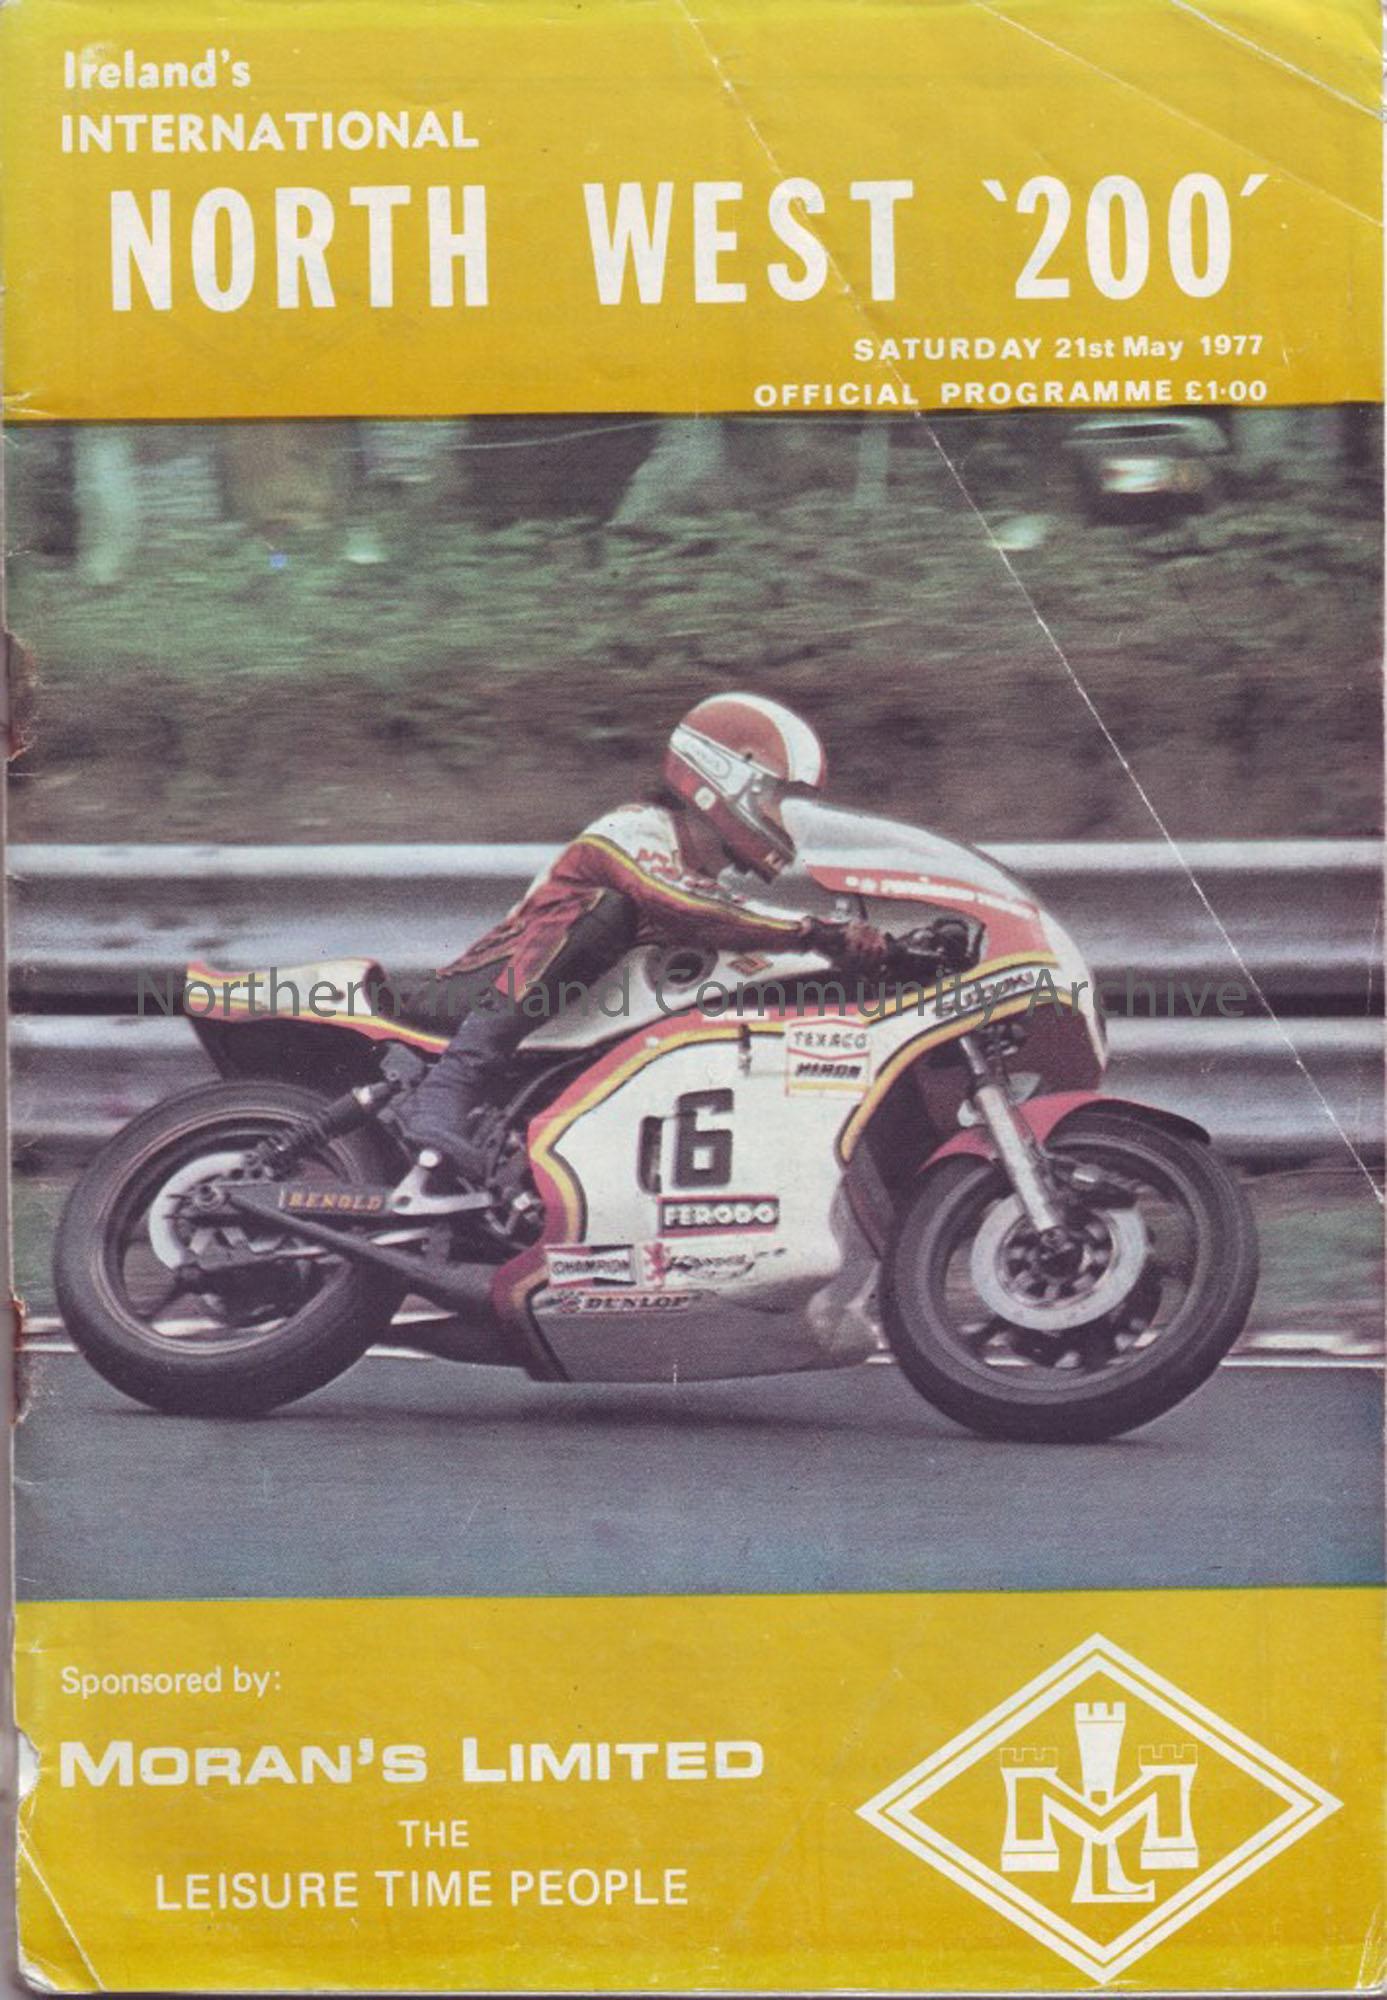 Official Programme of the North West 200, 1977. Includes lists of Entrants in each class and lap score charts. Sponsored by Moran’s Limited